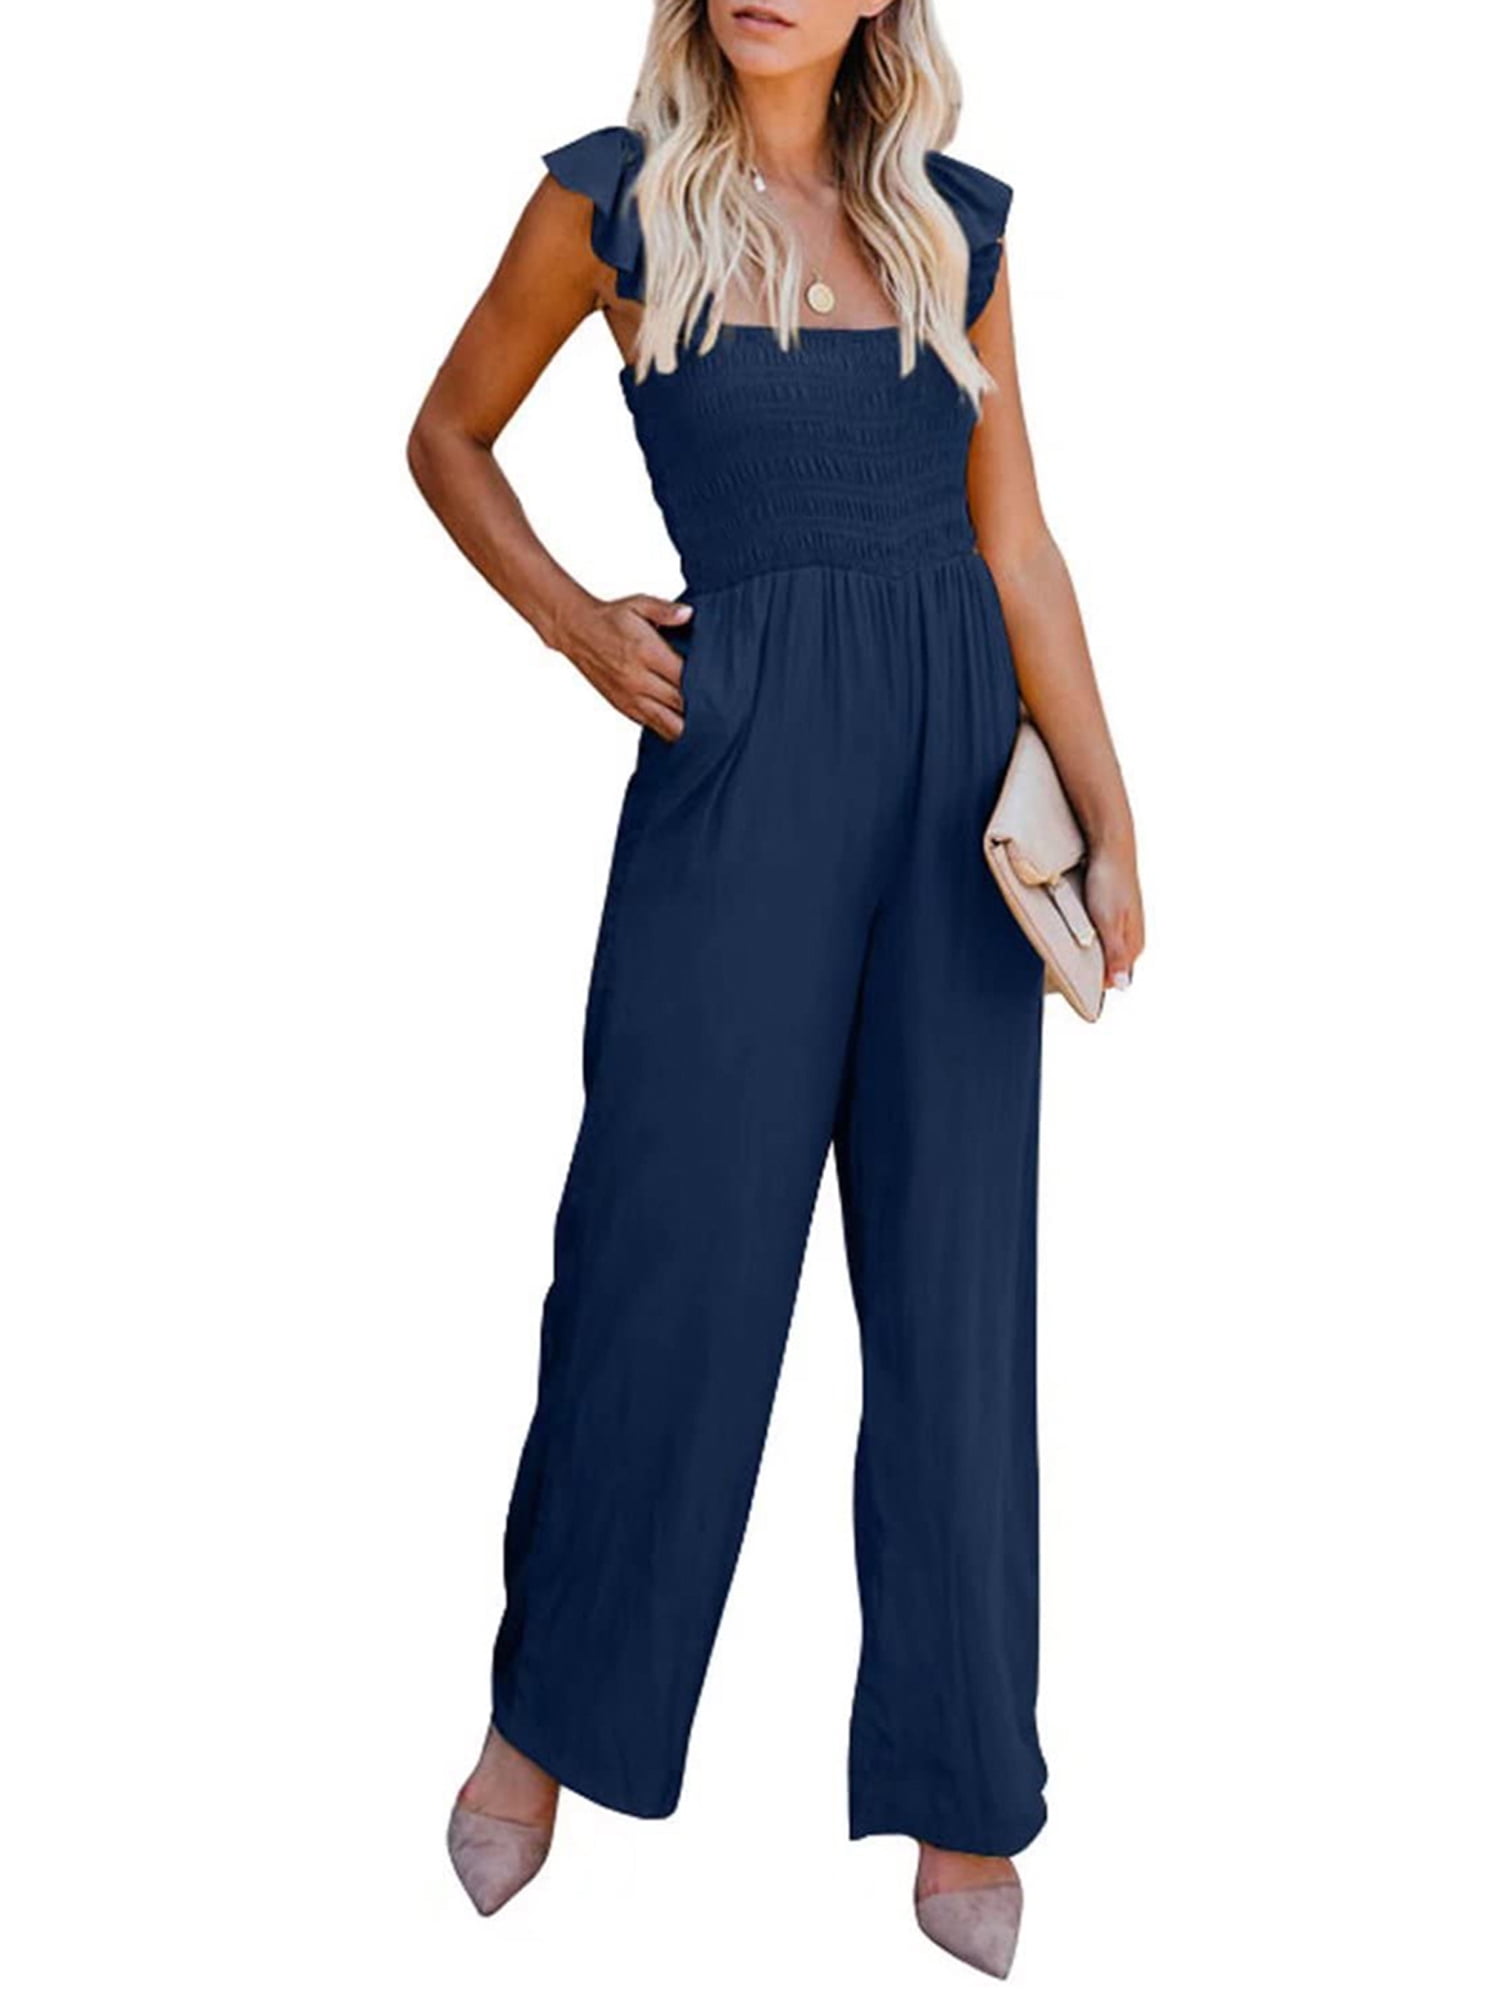 hirigin Women Summer Wide Leg Jumpsuit Casual Solid Color Flying Sleeve  Square Neck Ruched Rompers Overalls Long Pants Female Clothing 